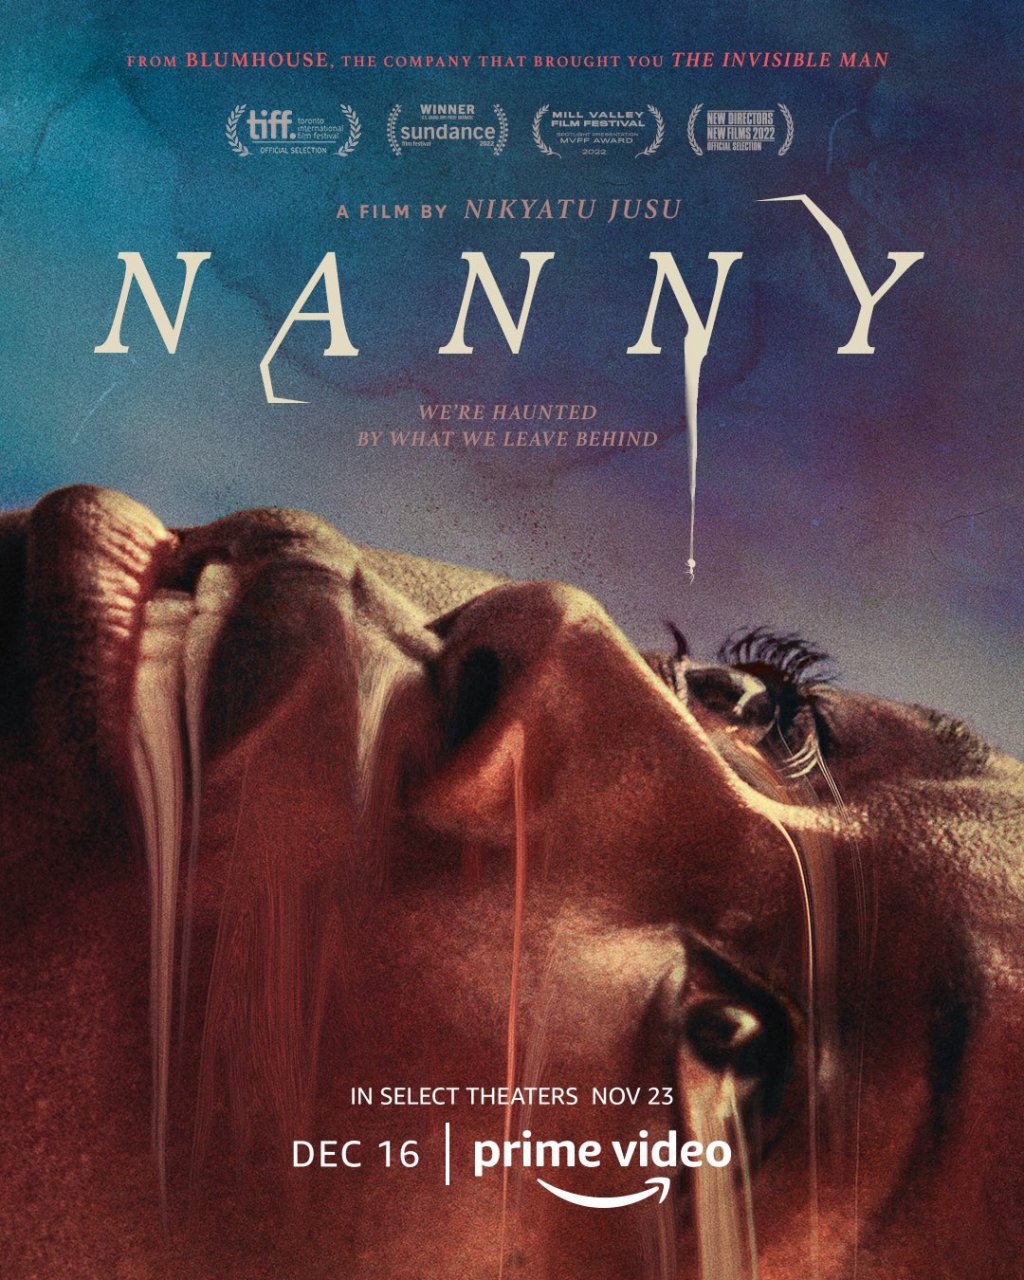 The Call from the Deep in Nikyatu Jusu’s film, Nanny  – a review